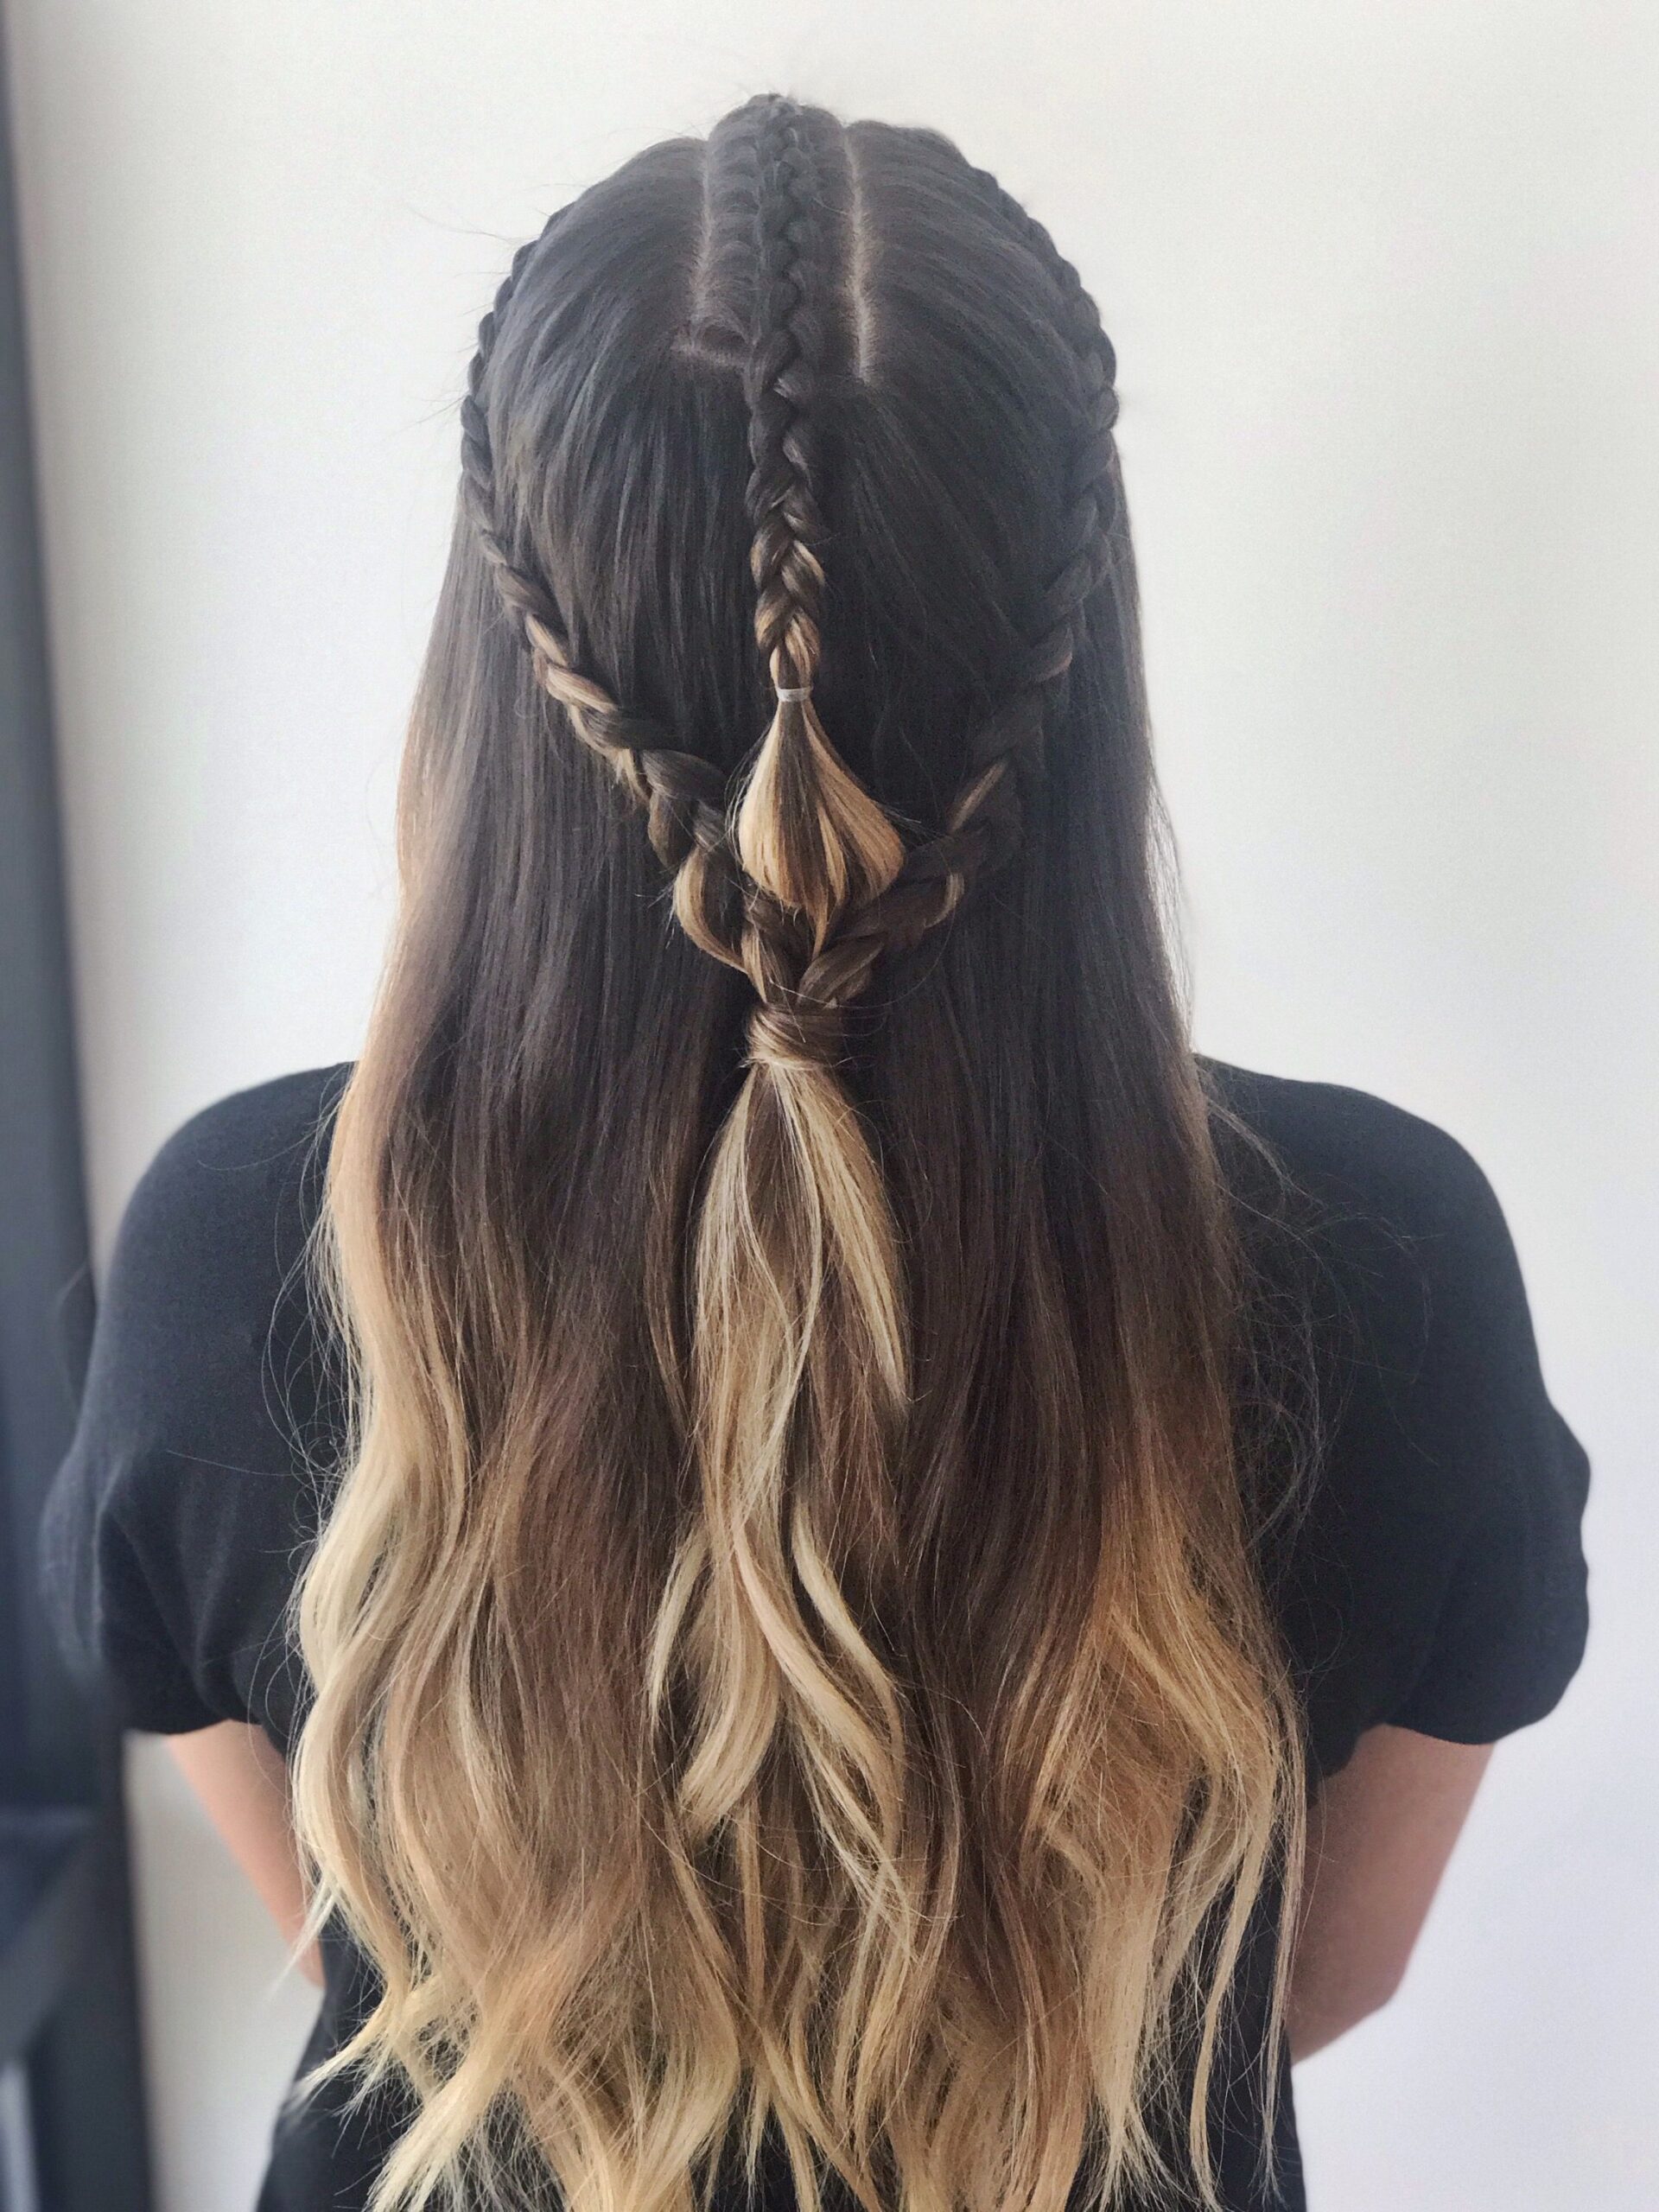 Game Of Thrones Inspired Braid